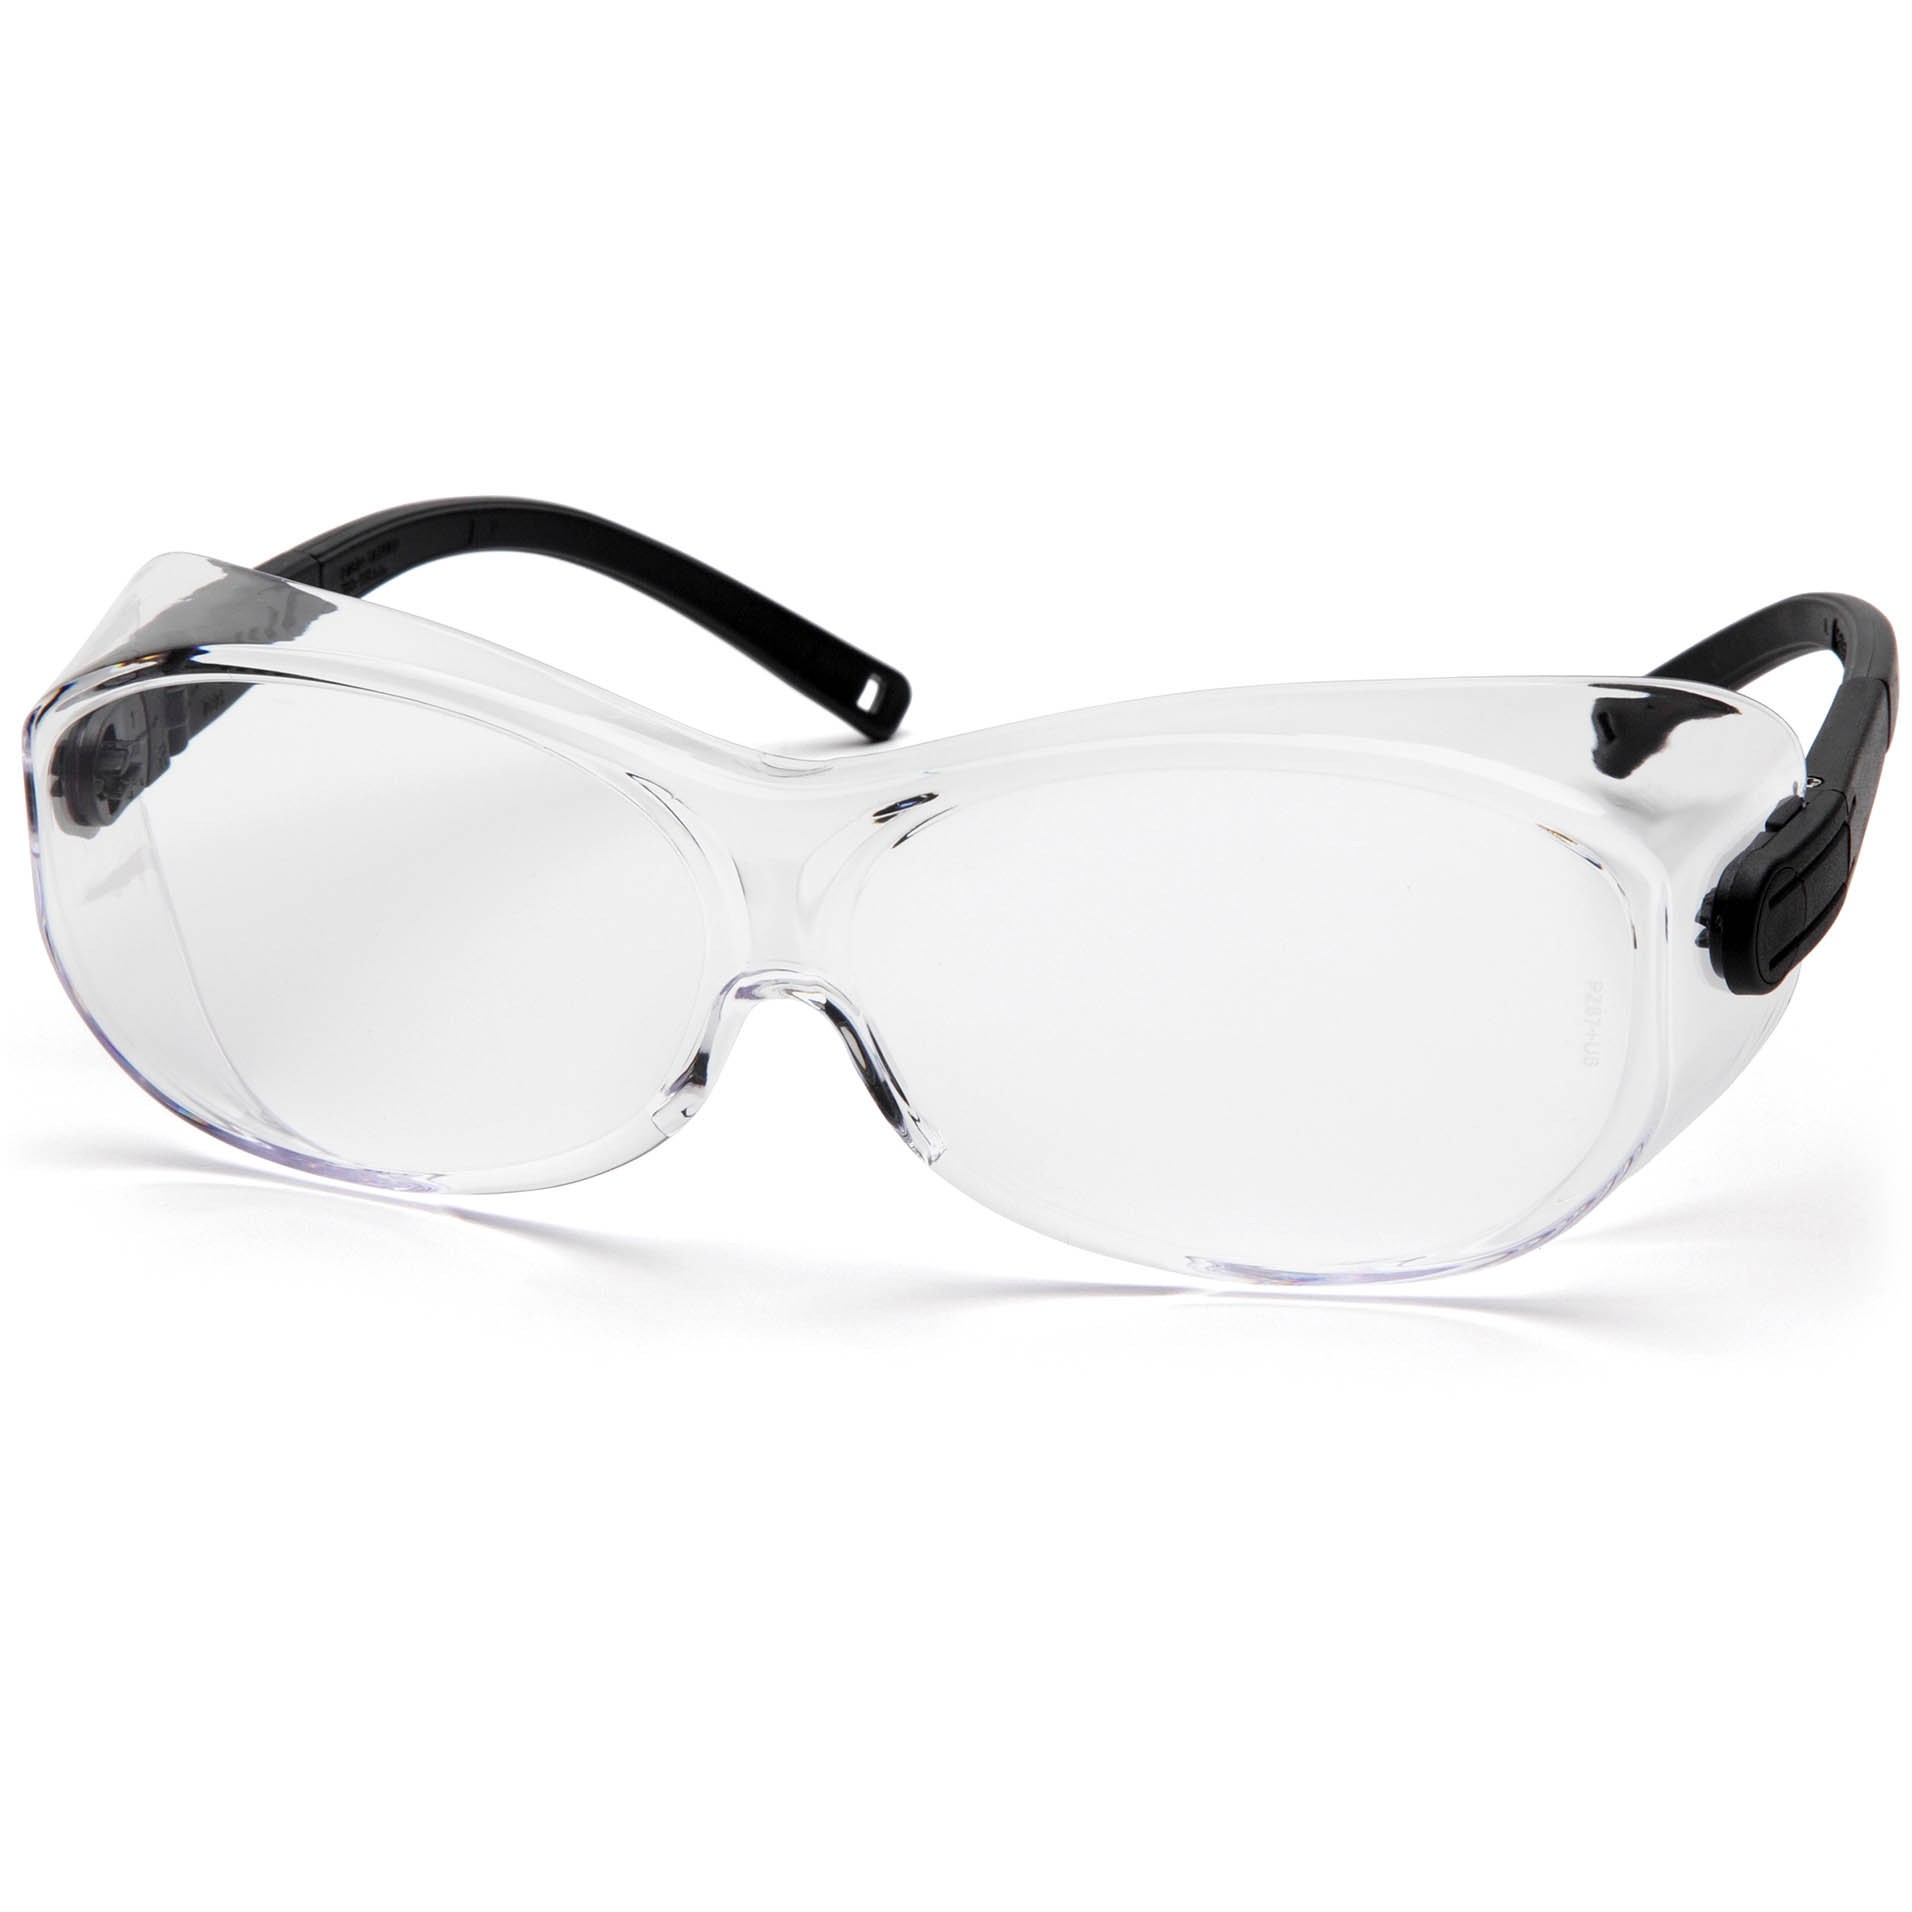 Safety Glasses And Goggles Pyramex Clear Side Shields For Safety Glasses Rx Eyewear Personal 